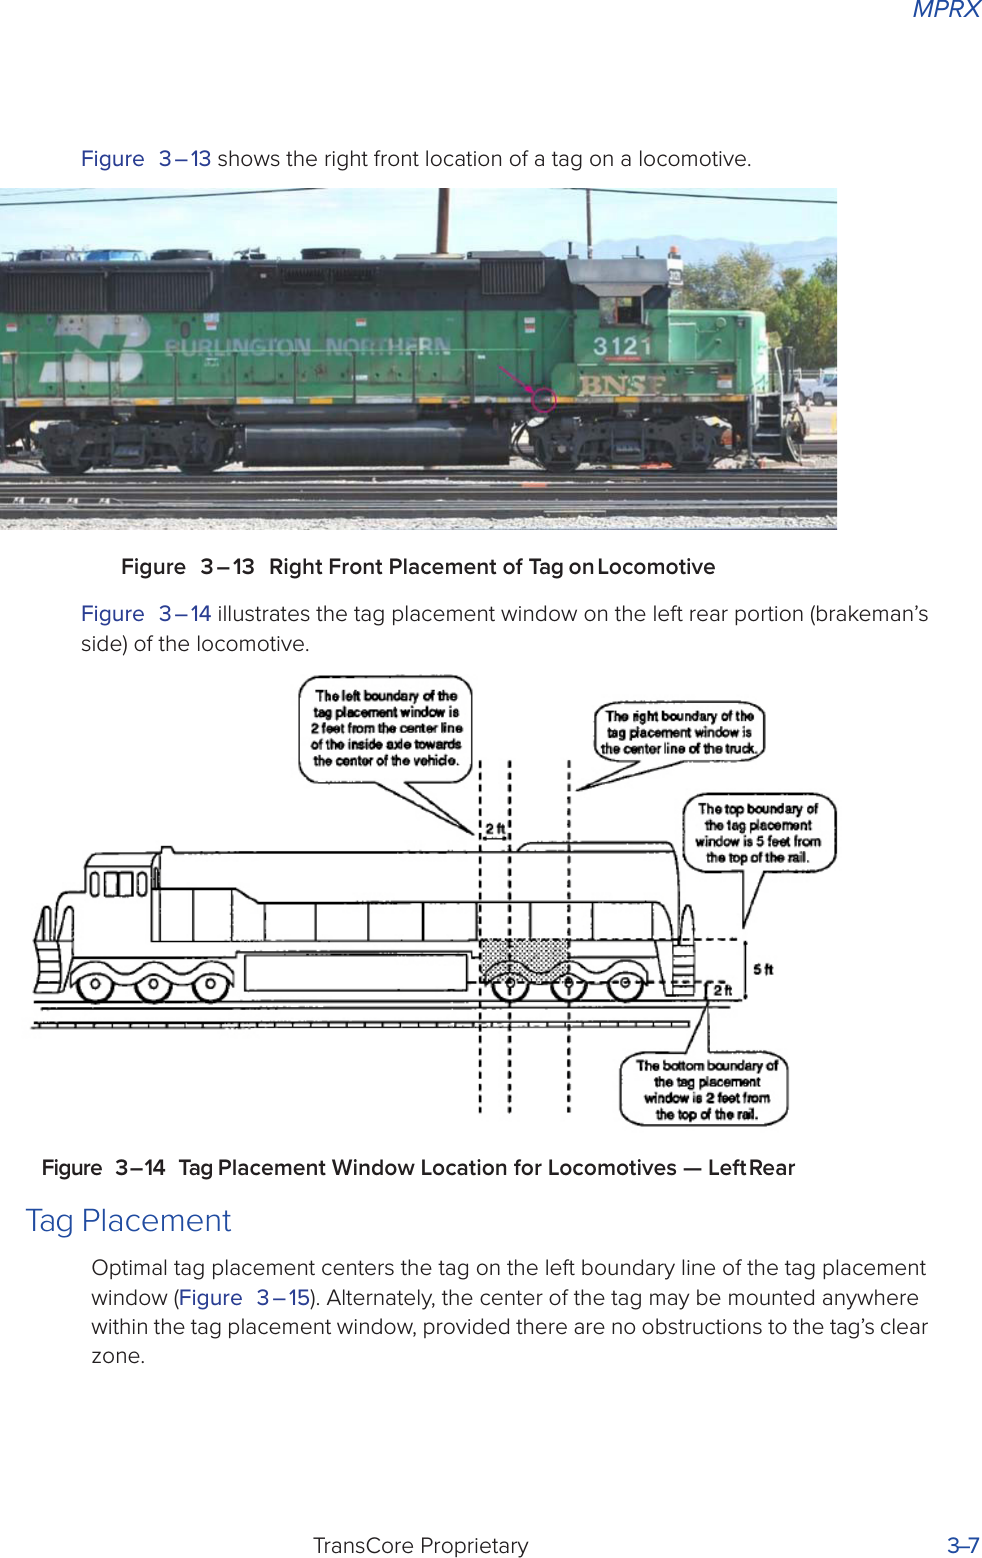 MPRXTransCore Proprietary 3–7Figure 3 – 13 shows the right front location of a tag on a locomotive.Figure 3 – 13 Right Front Placement of Tag on LocomotiveFigure 3 – 14 illustrates the tag placement window on the left rear portion (brakeman’s side) of the locomotive.Figure 3 – 14 Tag Placement Window Location for Locomotives — Left RearTag PlacementOptimal tag placement centers the tag on the left boundary line of the tag placement window (Figure 3 – 15). Alternately, the center of the tag may be mounted anywhere within the tag placement window, provided there are no obstructions to the tag’s clear zone.